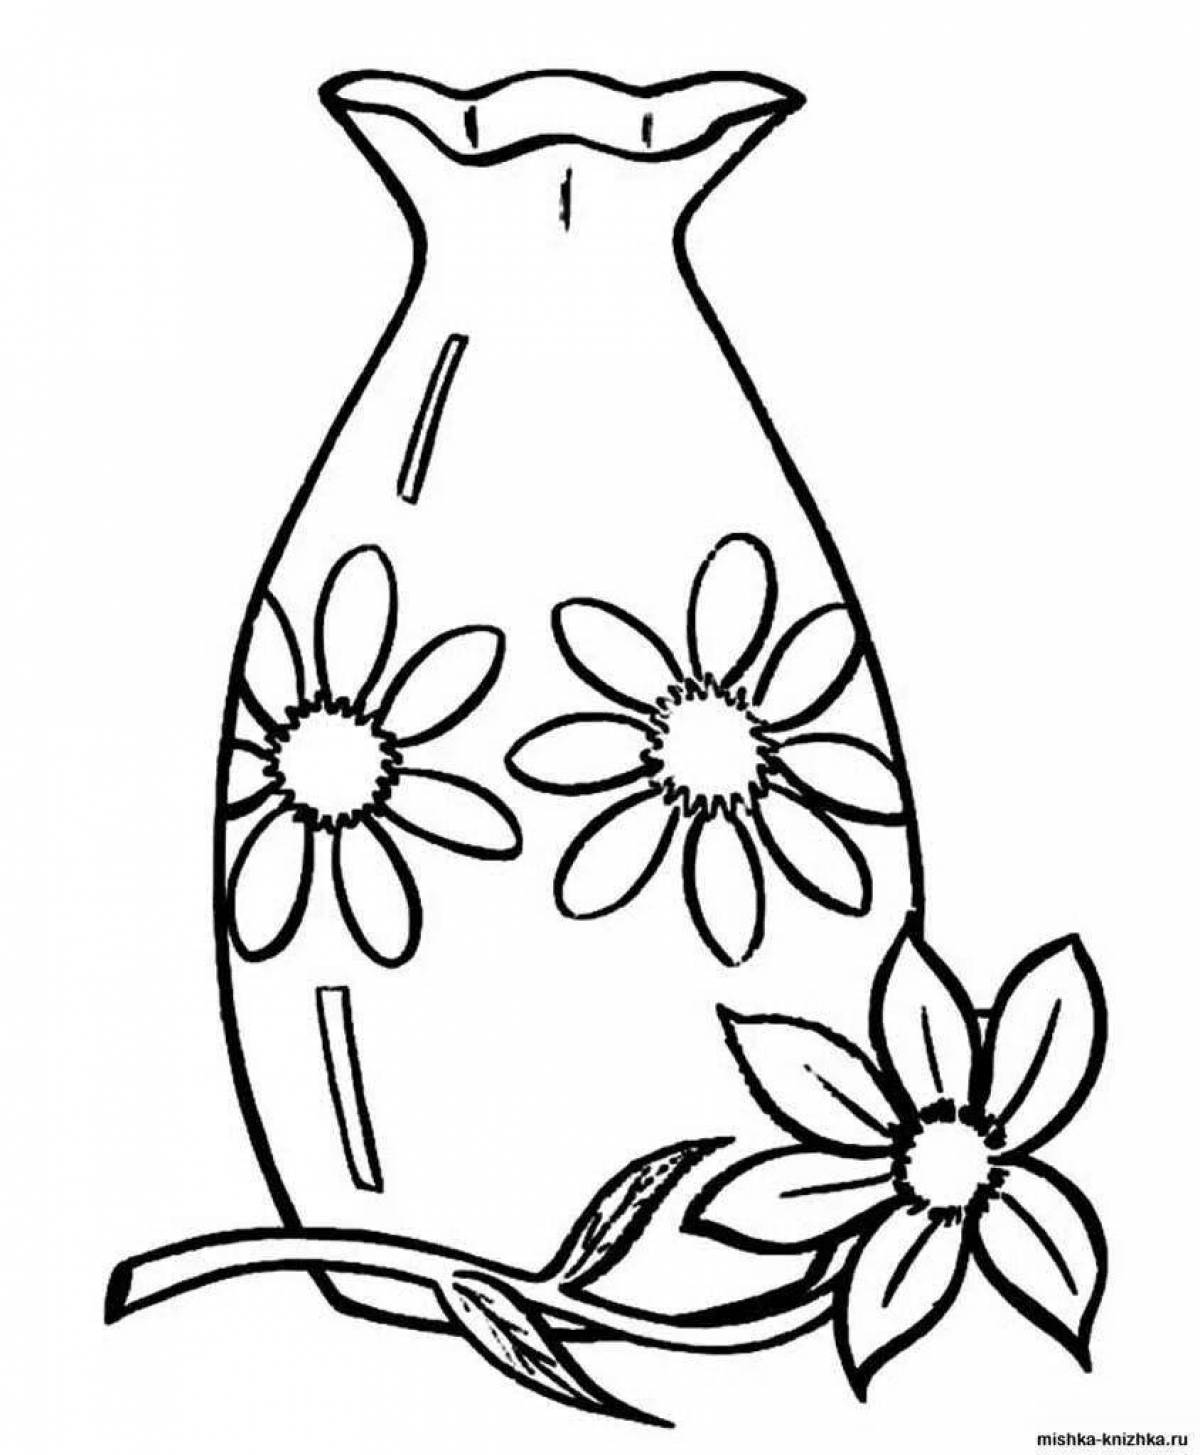 Charming coloring vase